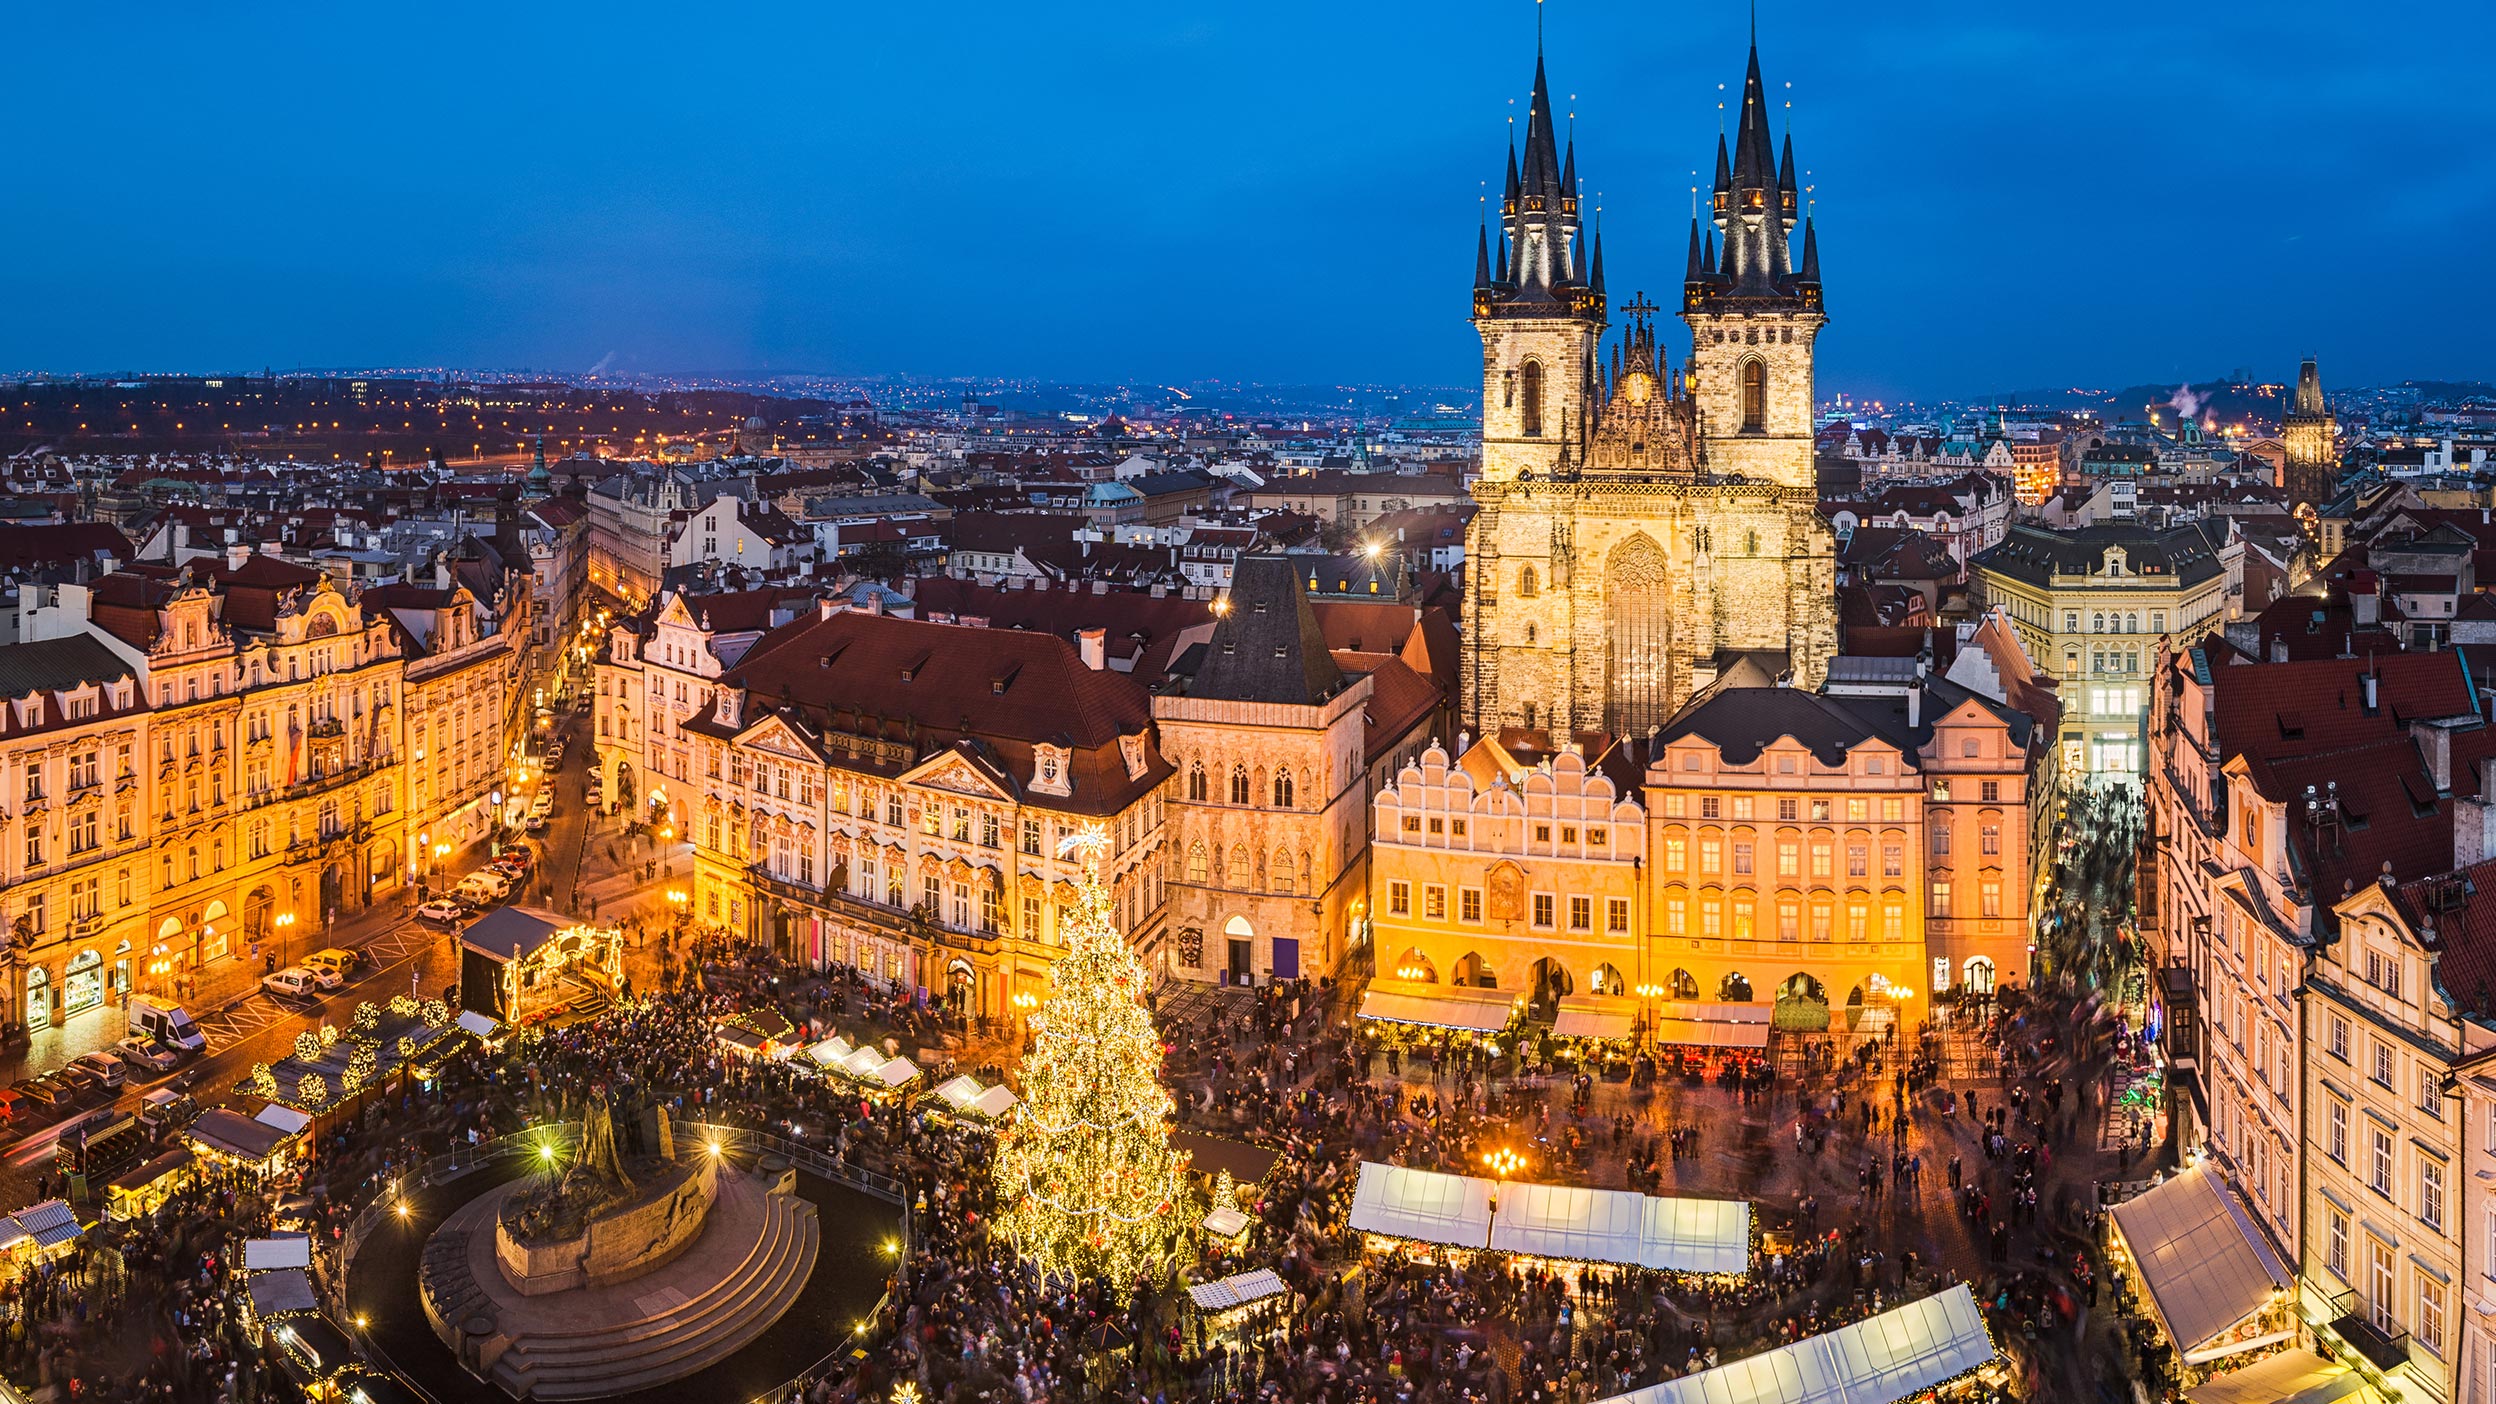 Christmas without mother: what’s next for Germany?